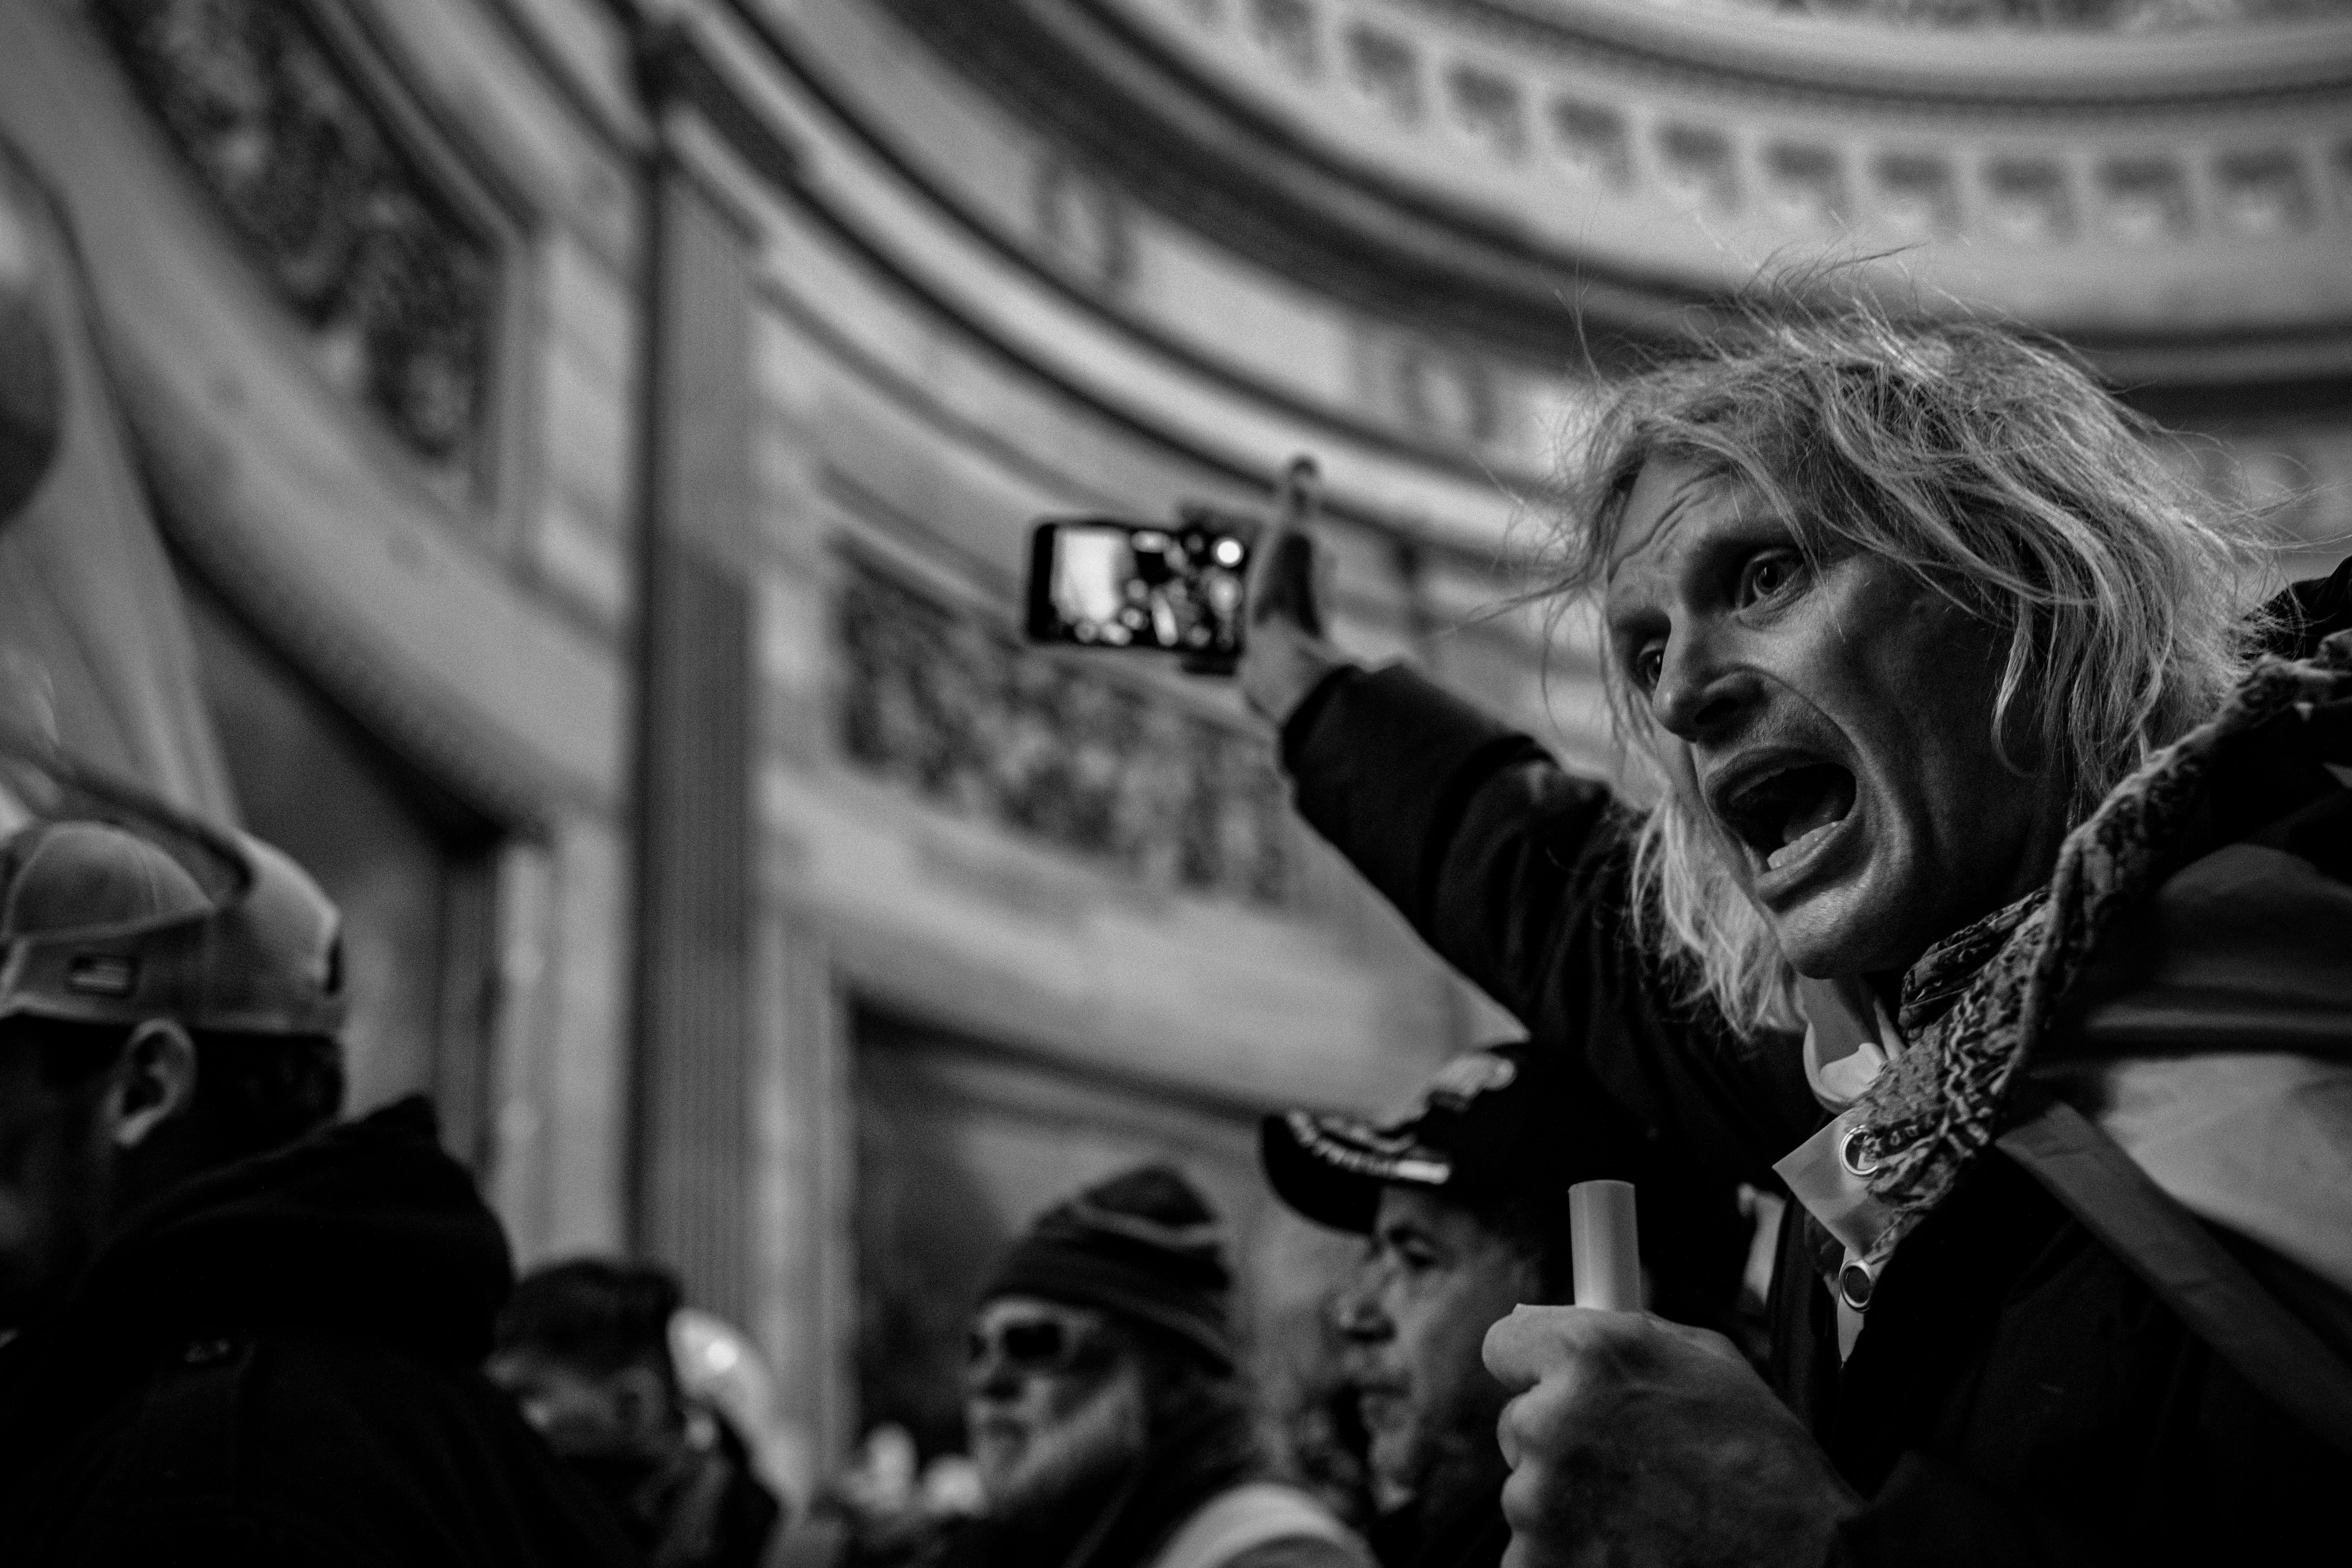 Protesters storm the Rotunda, inside the Capitol in Washington, D.C. after listening to a speech by President Trump on January 6, 2021. A large mob who convened on Washington, D.C. for a ?Save America? or ?Stop the Steal? rally was incited by President Trump and stormed the United States Capitol building, fighting with police, and damaging offices and rooms as they made their way through the building.As President Trump openly condoned the violence, the D.C, mayor called for a 6 p.m. curfew, and mobilized the National Guard. (Photo by Ashley Gilbertson / VII Photo)